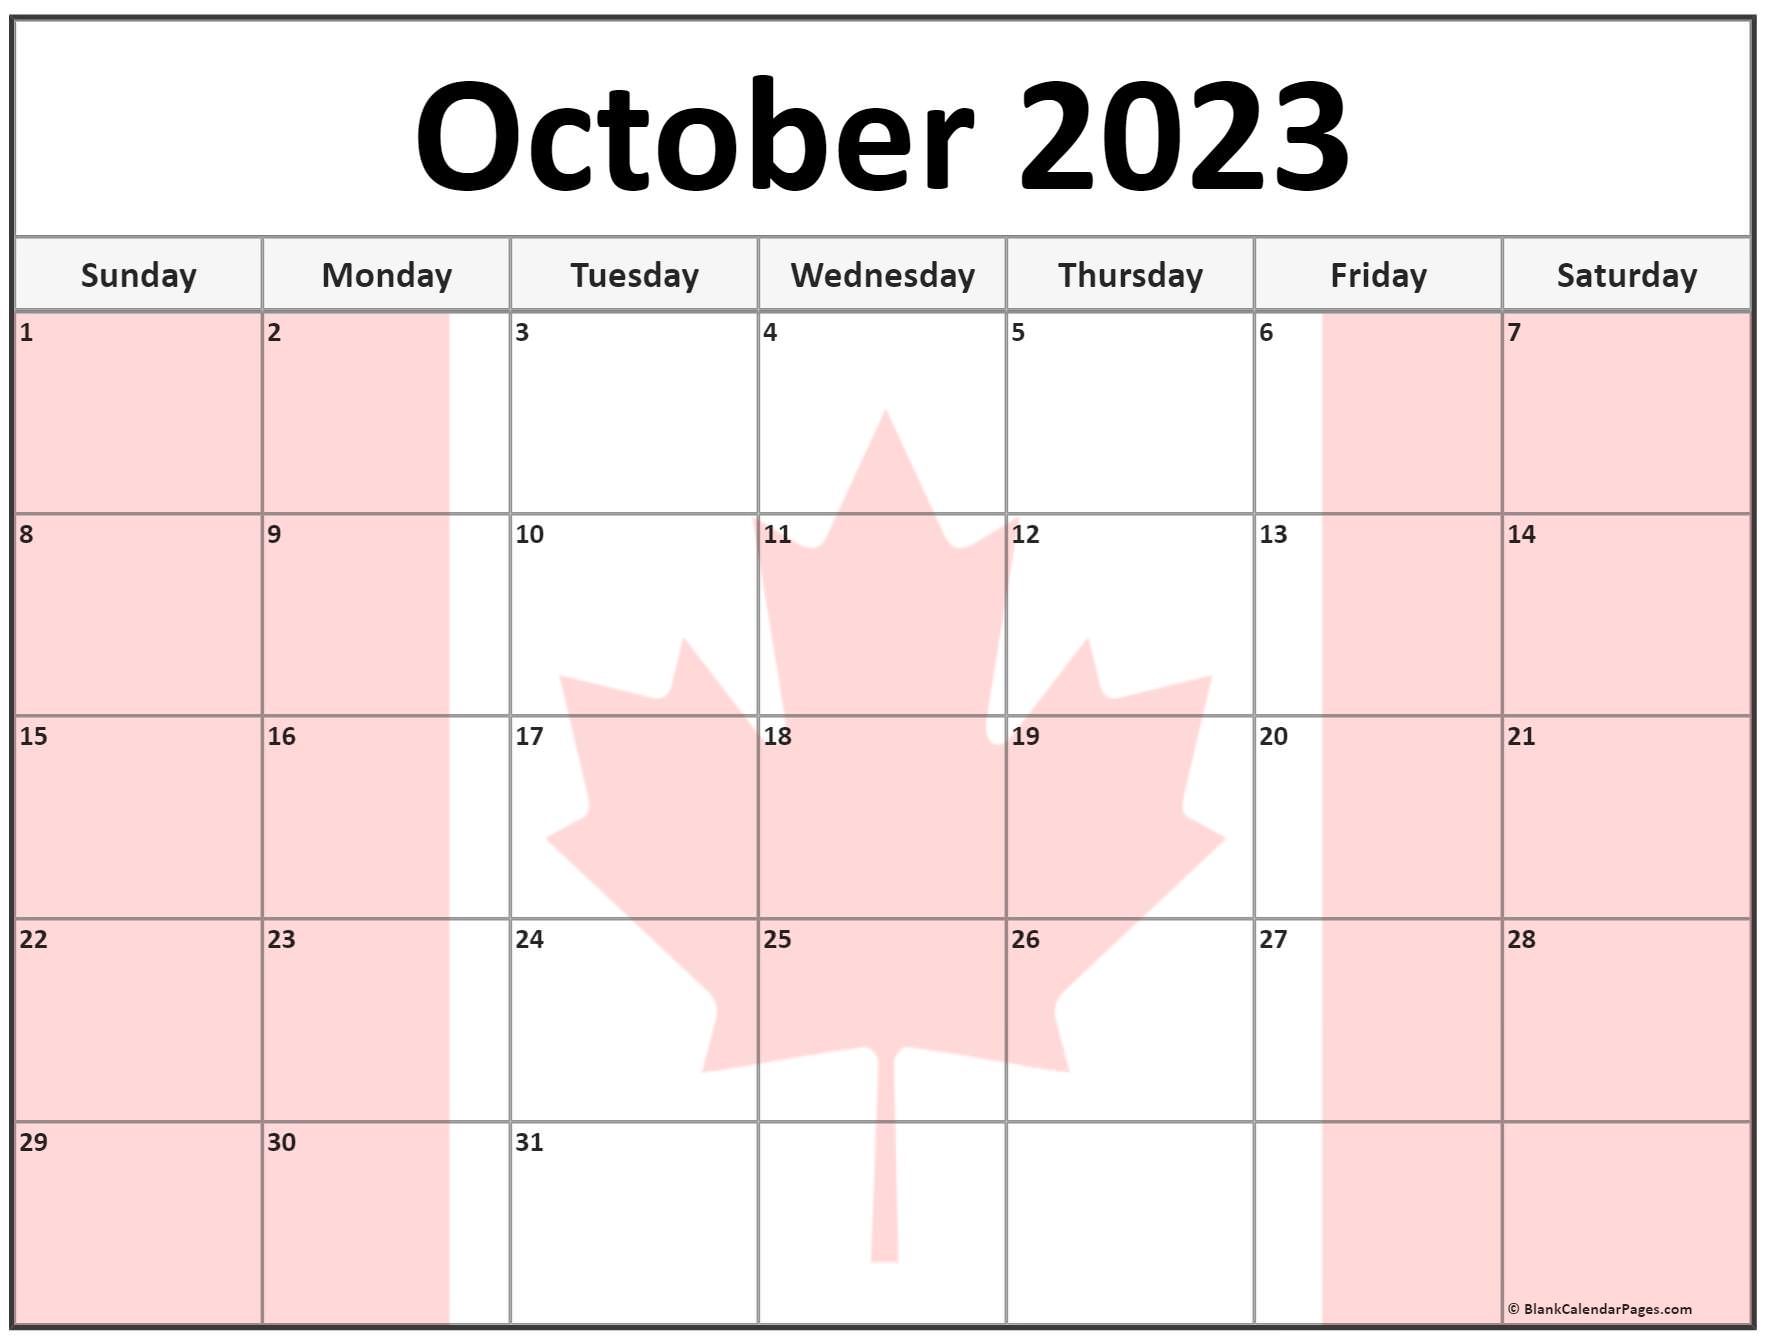 collection-of-october-2023-photo-calendars-with-image-filters-2023